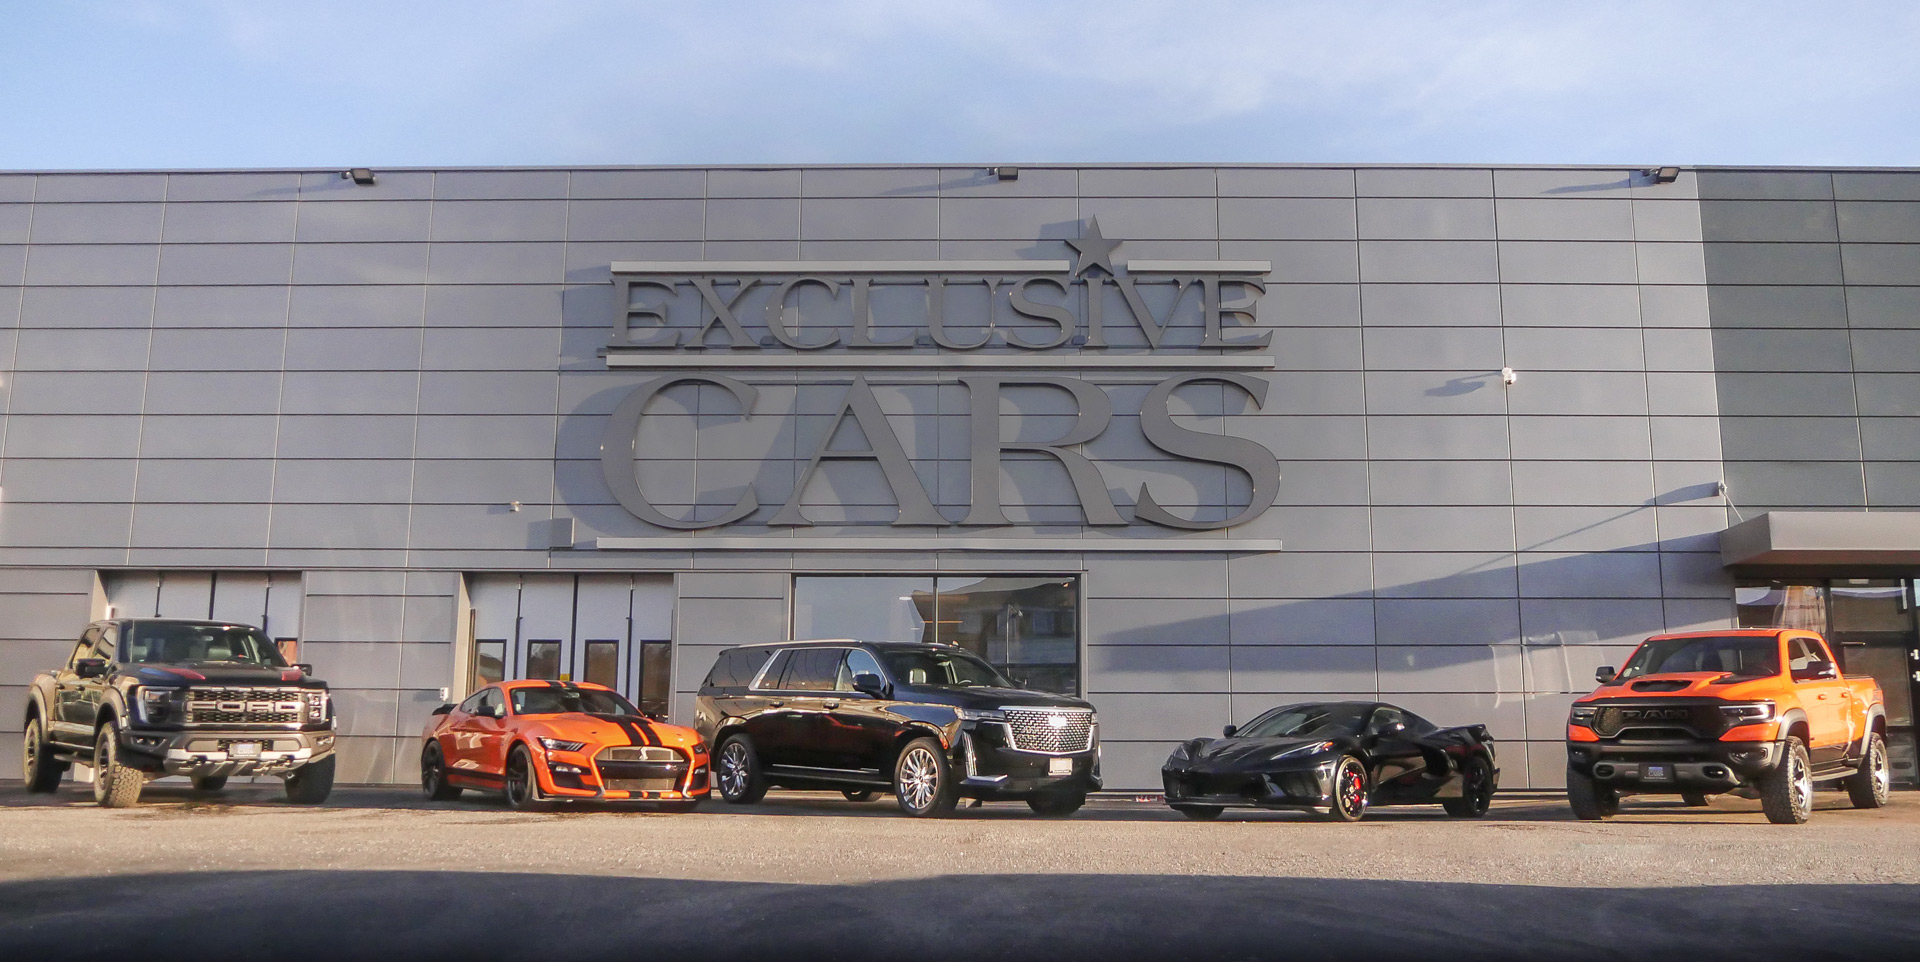 Exclusive Cars Dodge Ram Shelby GT500 Mustang Cadillac Escalade Corvette C8 TRX Ford Raptor